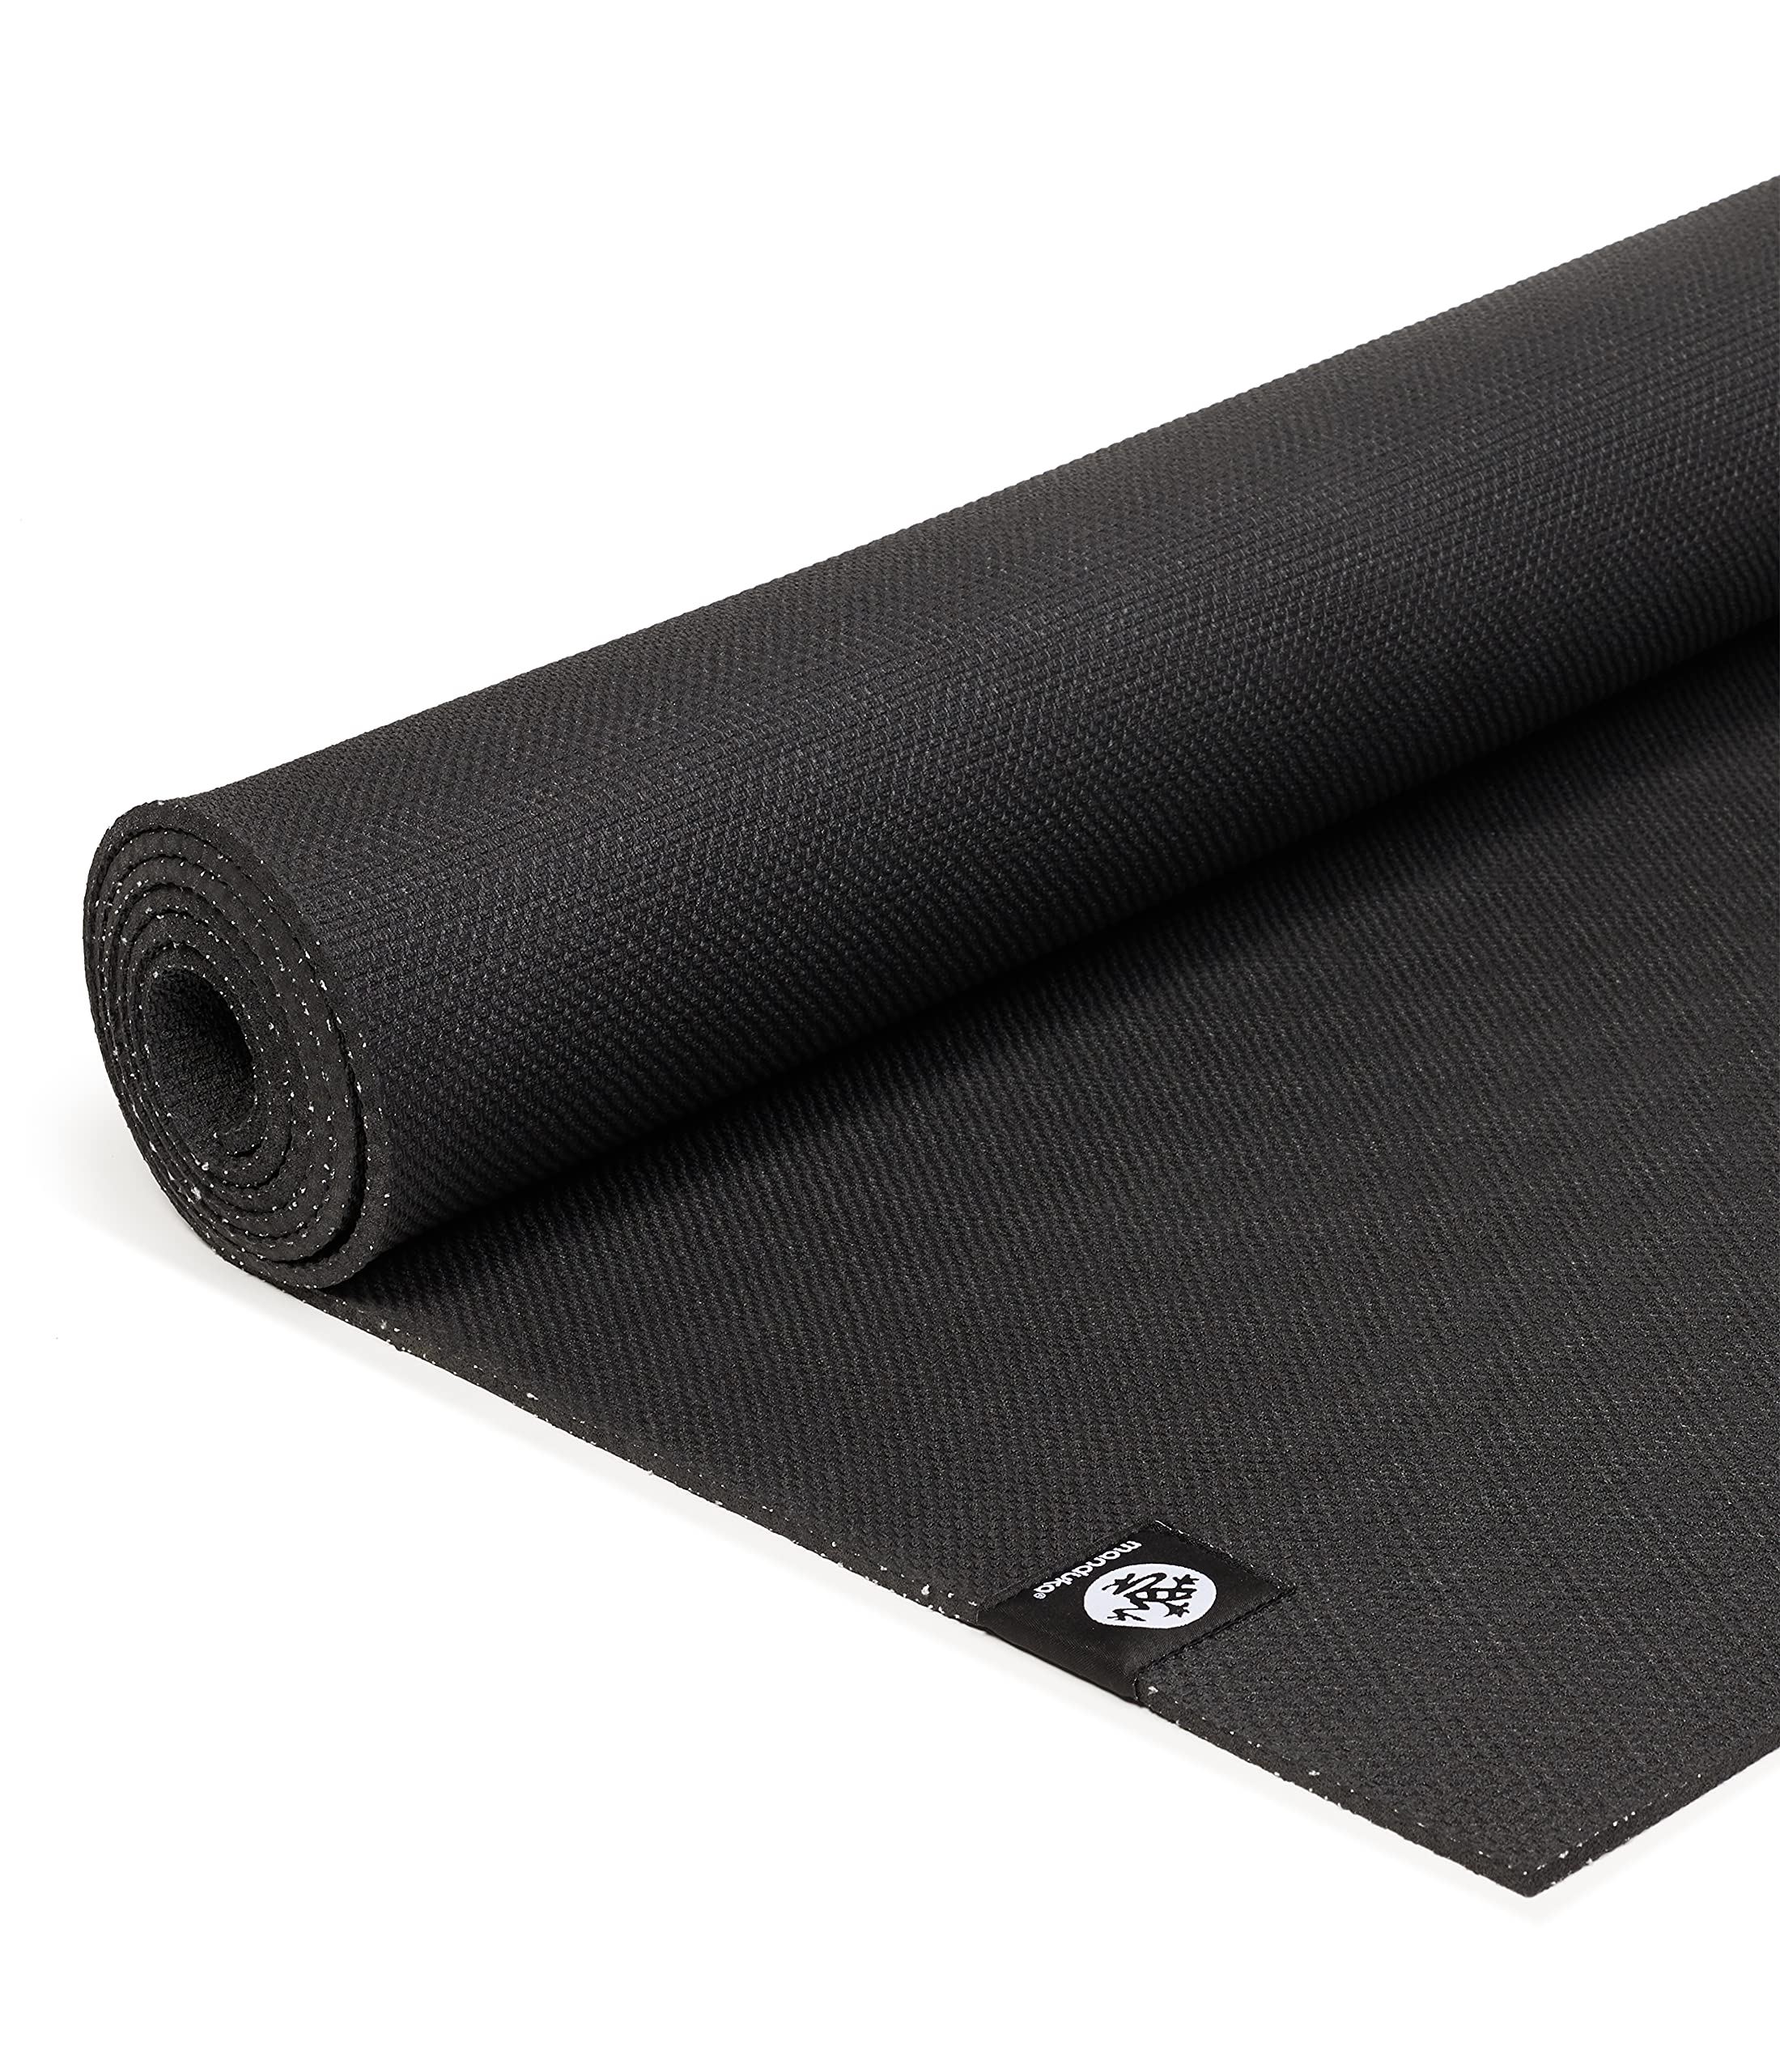 Manduka X Yoga Mat - Easy to Carry, For Women and Men, Non Slip, Cushion  for Joint Support and Stability, 5mm Thick, 71 Inch (180cm) Black